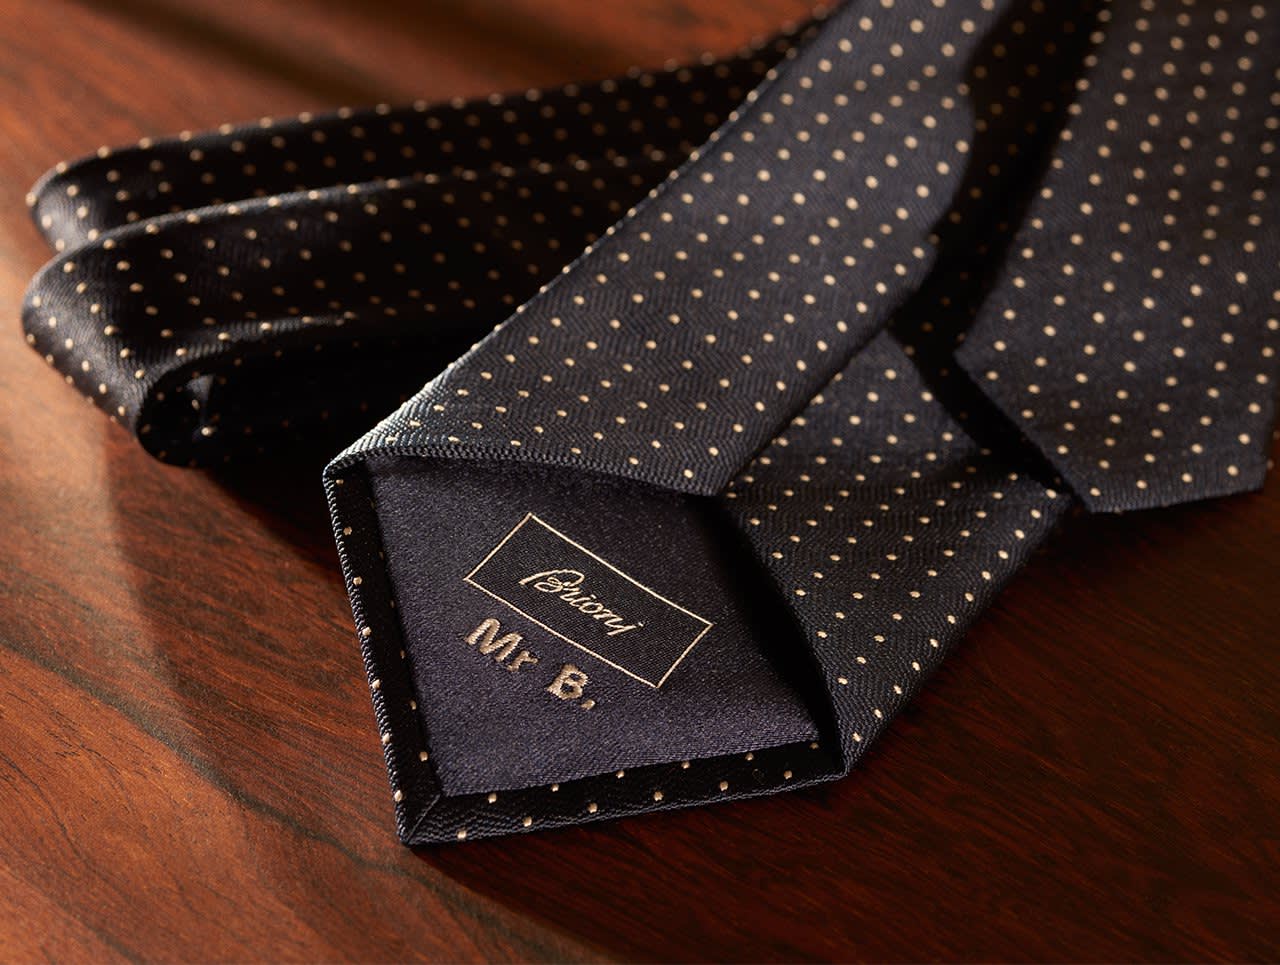 A Brioni made-to-order tie with customised monogram